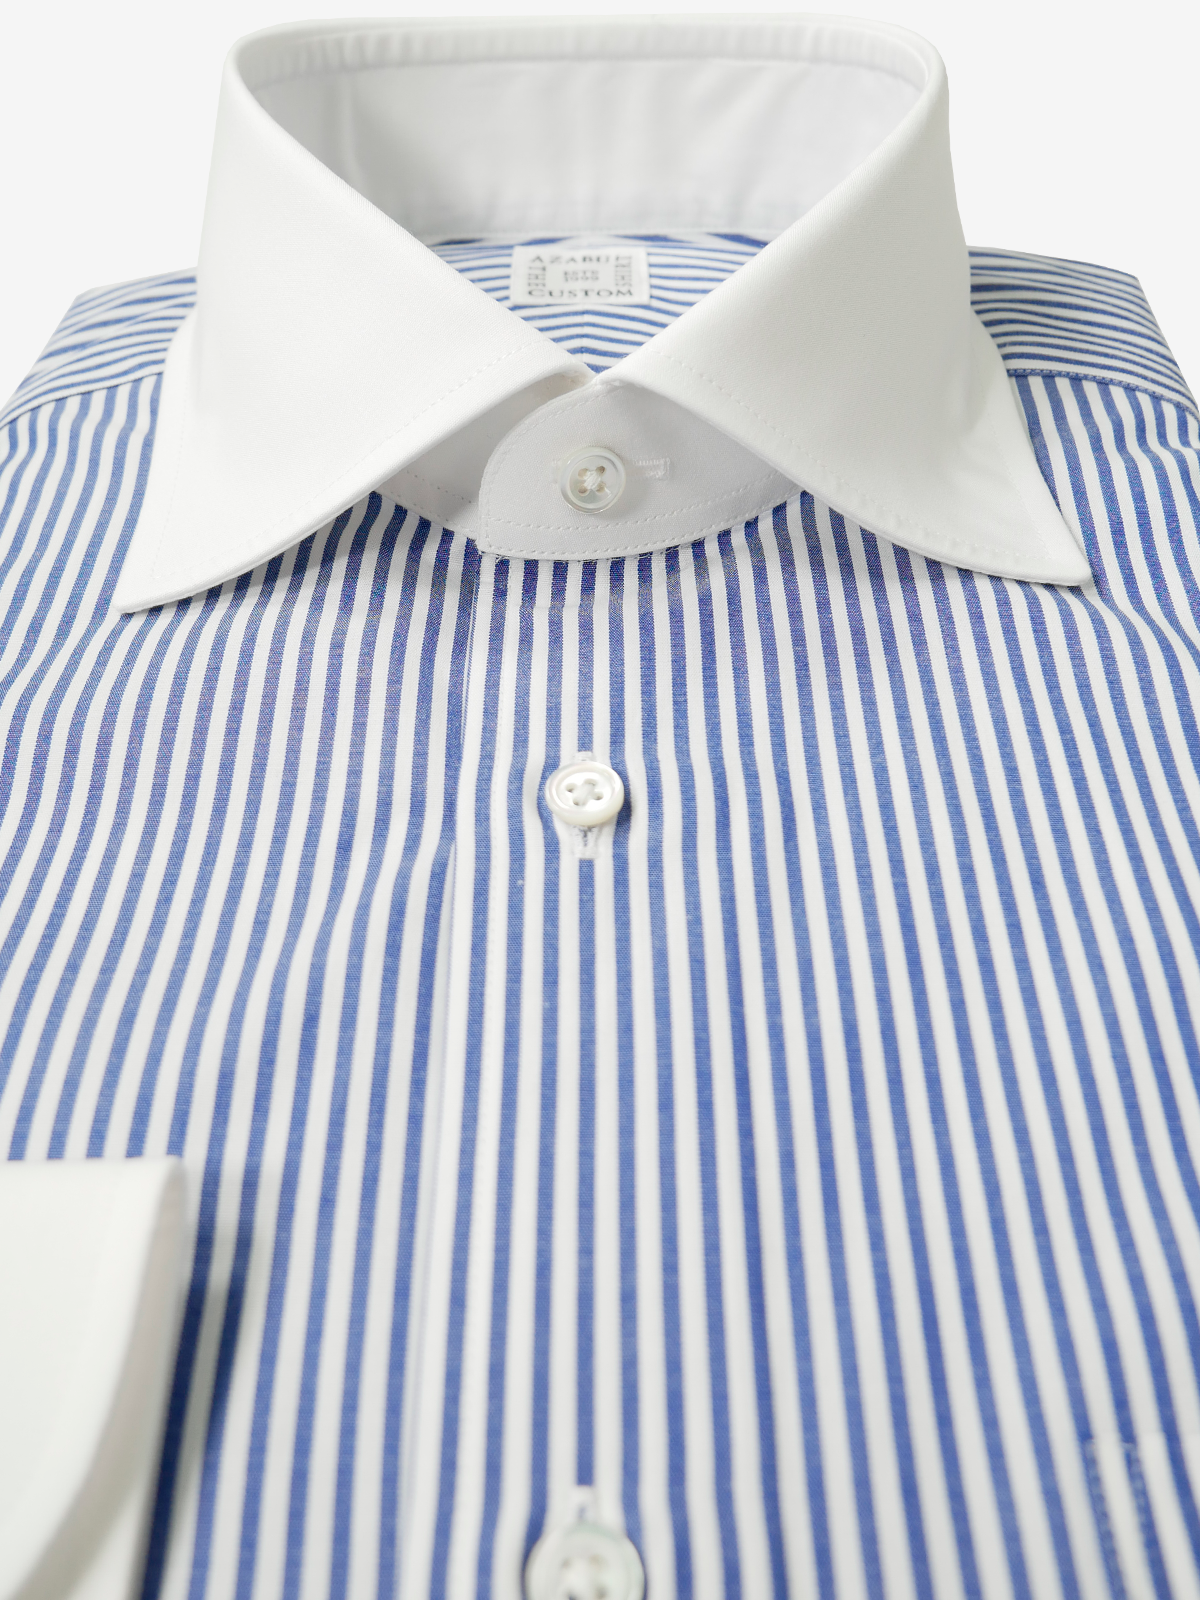 Striped Classic Fit Shirt With White Collar ｜ネイビー